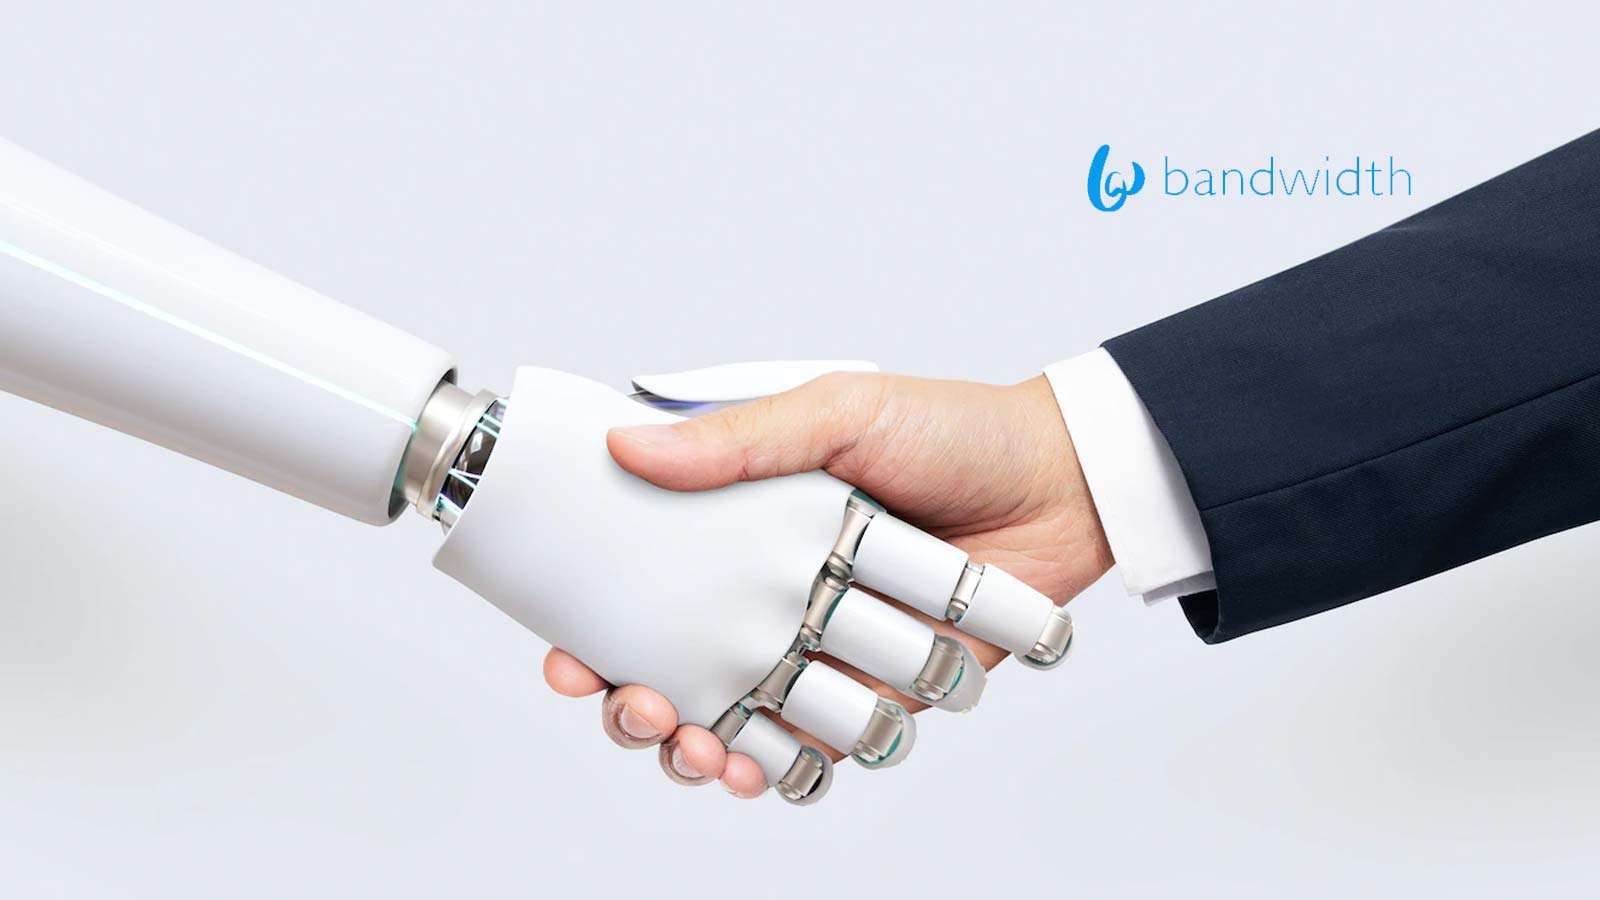 Bandwidth Partners with Google and Cognigy to Launch AIBridge, Integrating Artificial Intelligence with Contact Centers Using Maestro